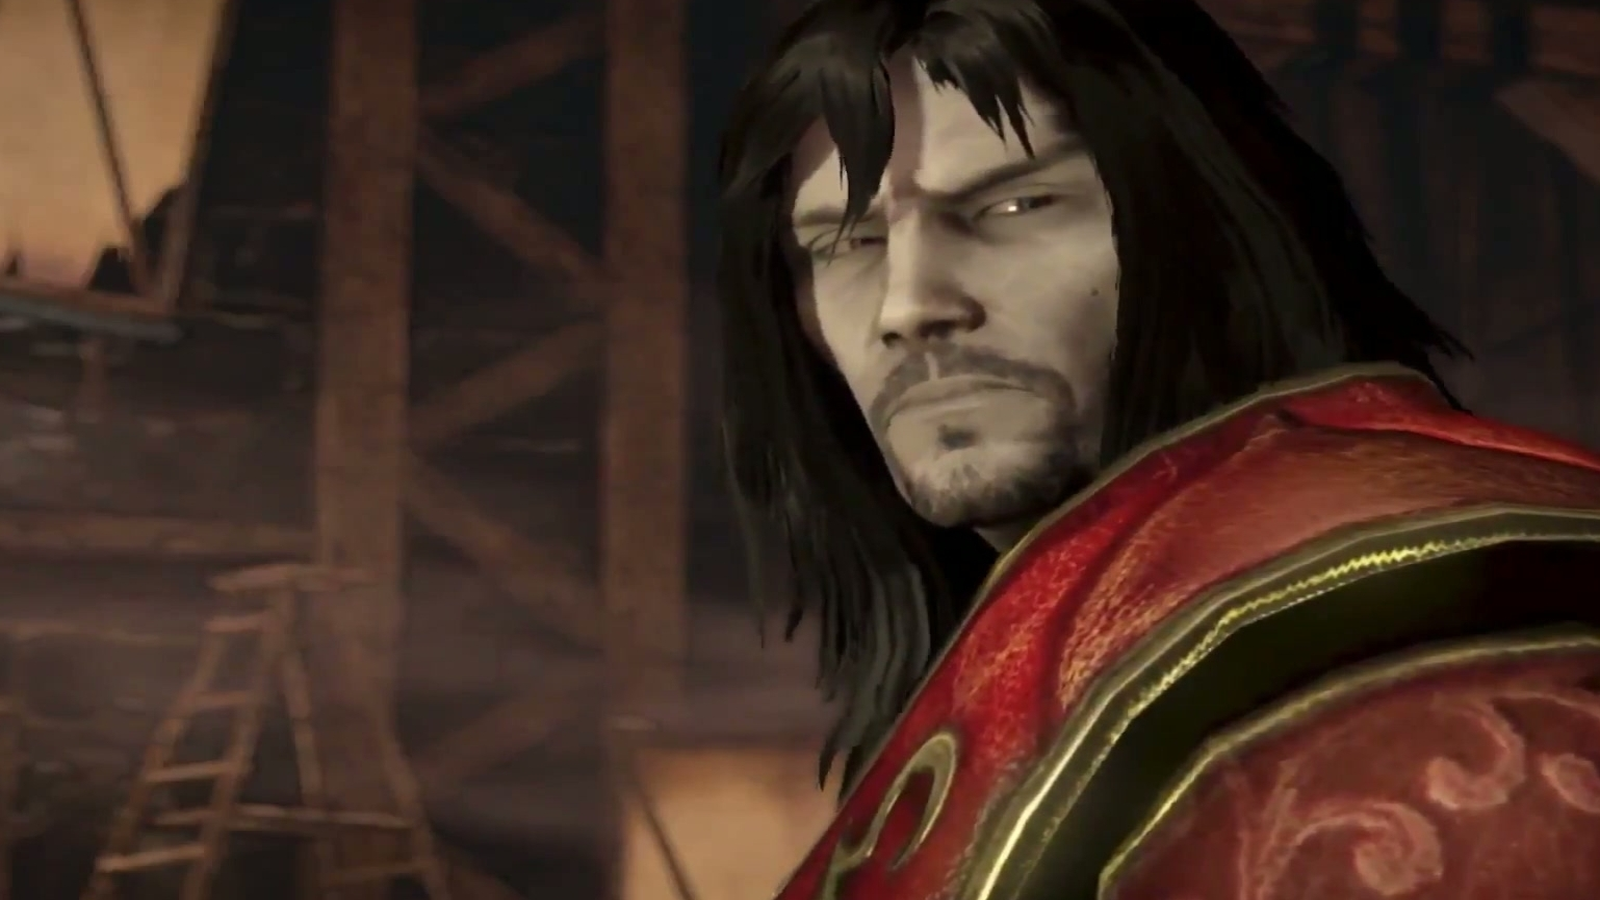 Castlevania: Lords of Shadow and Ace Combat 6 are now backward